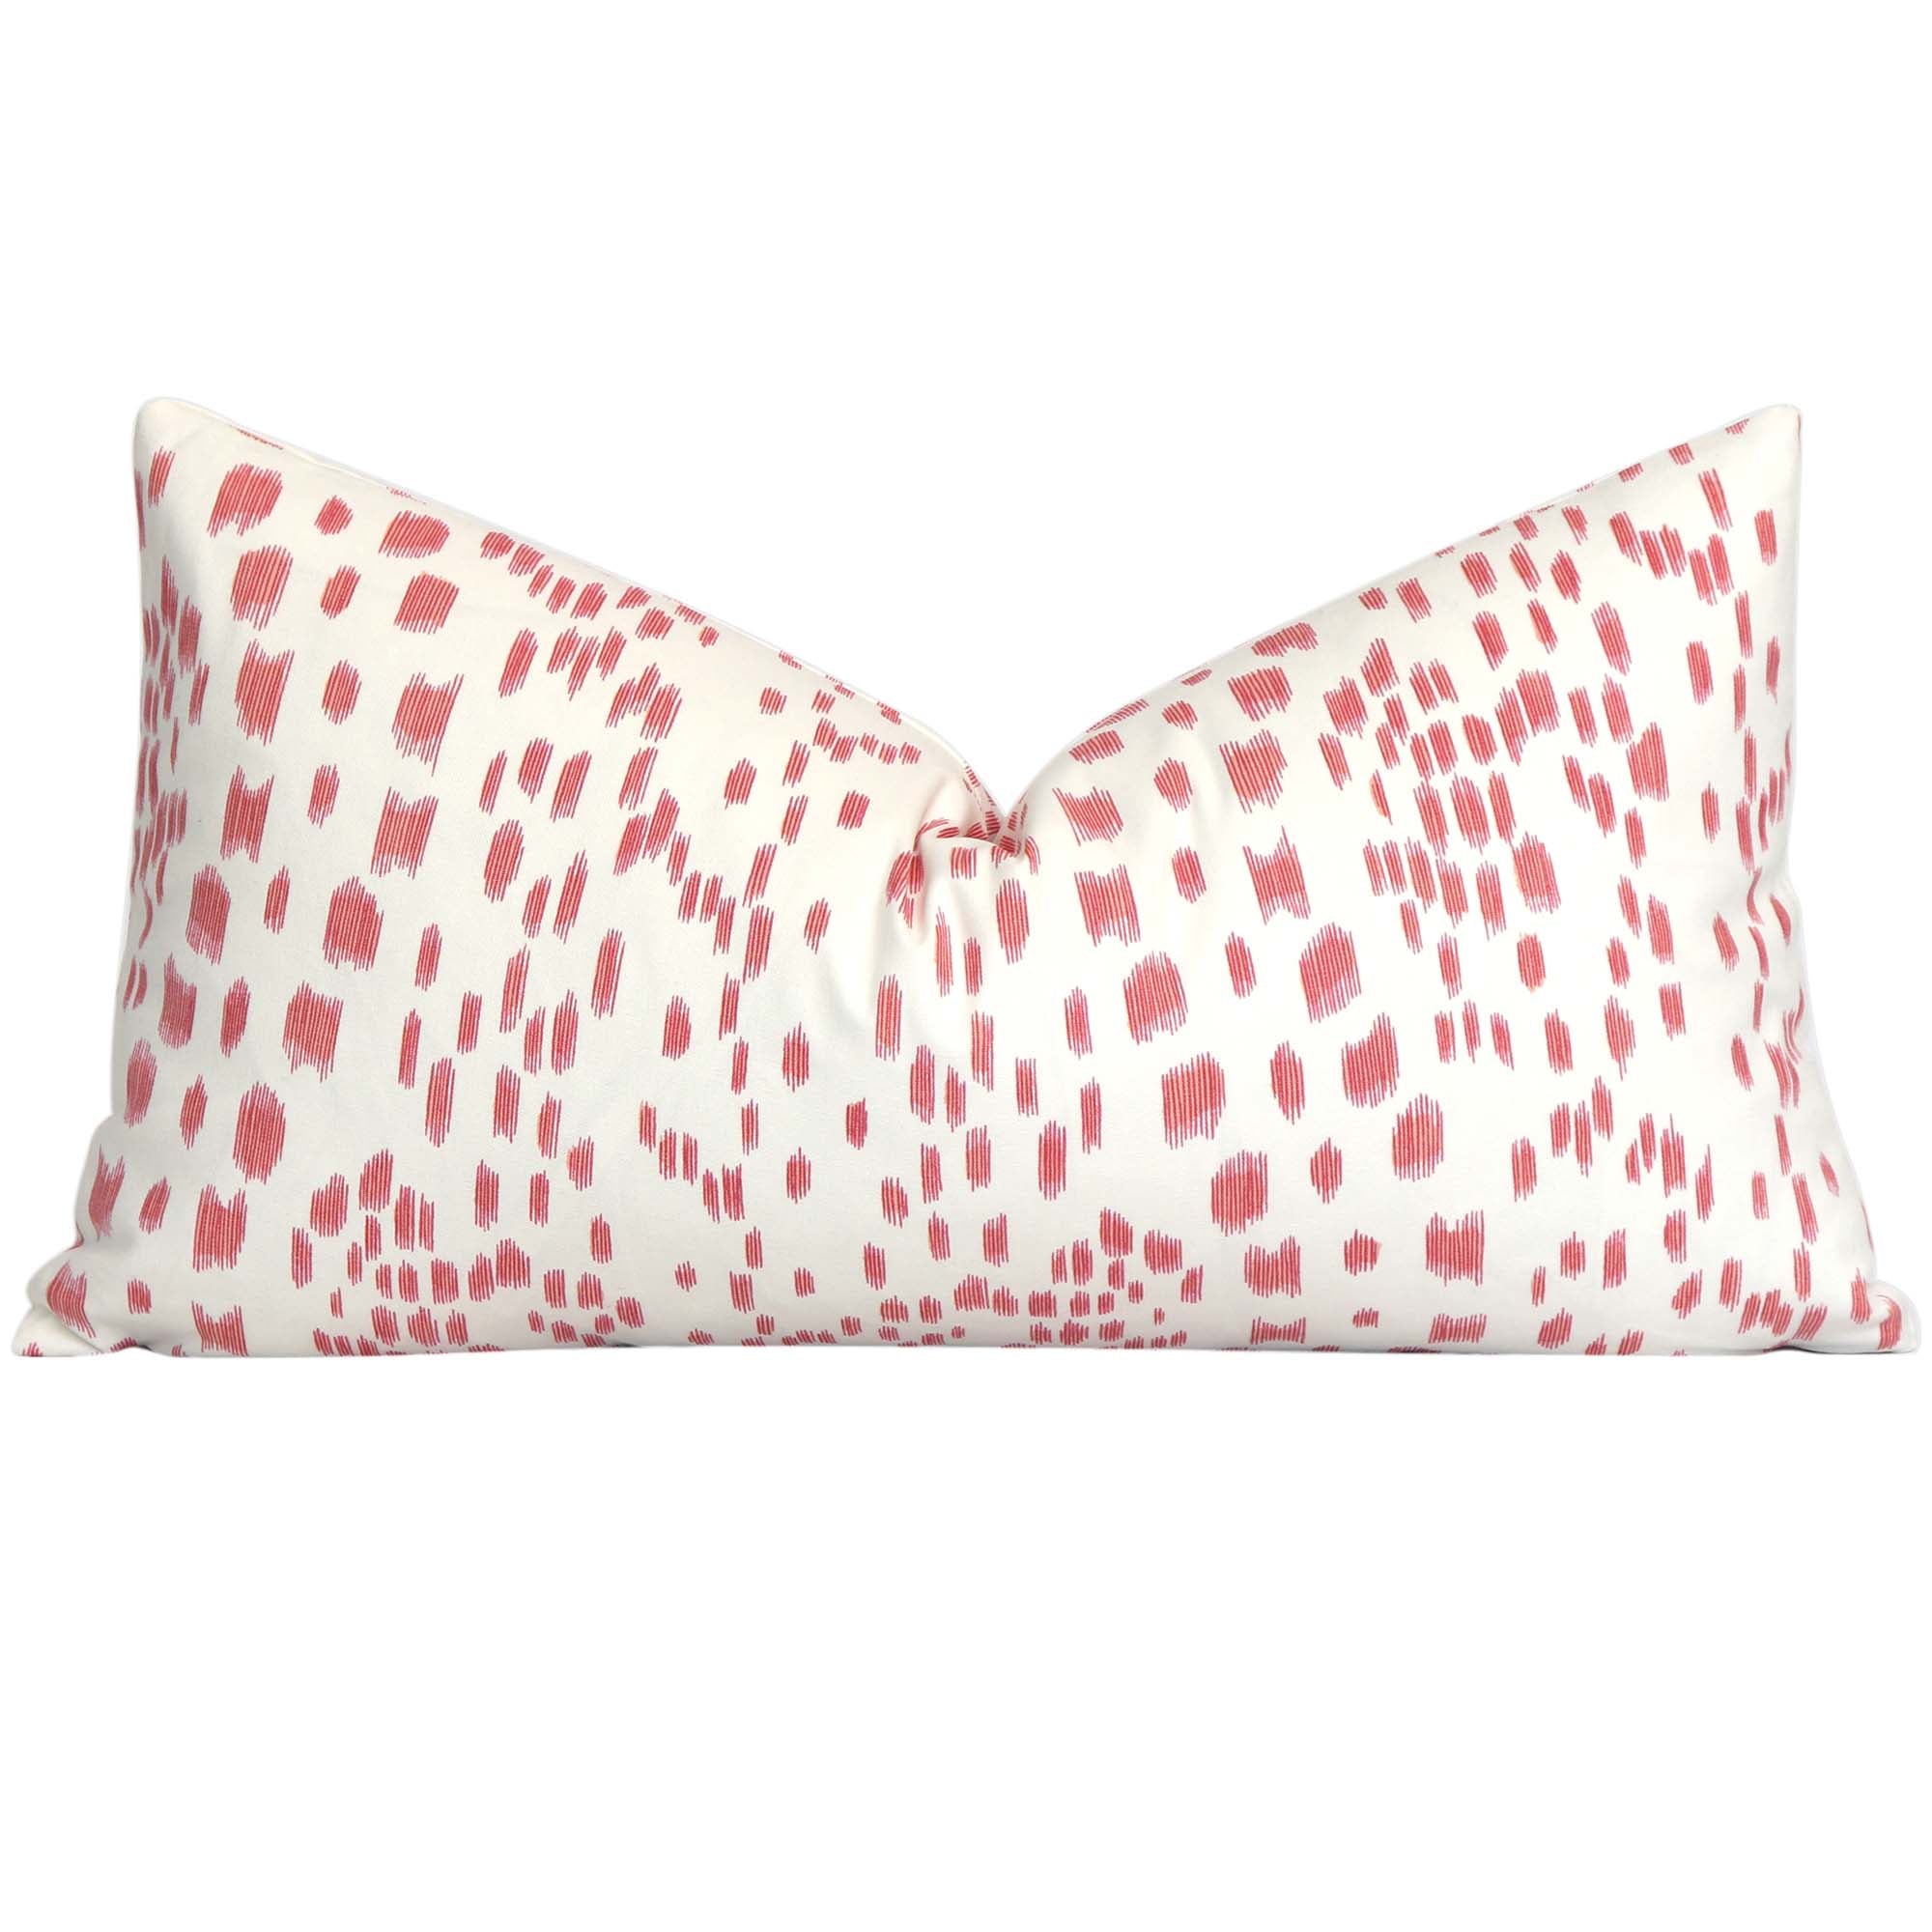 Les Touches Berry Pink Designer Luxury Lumbar Throw Pillow Cover